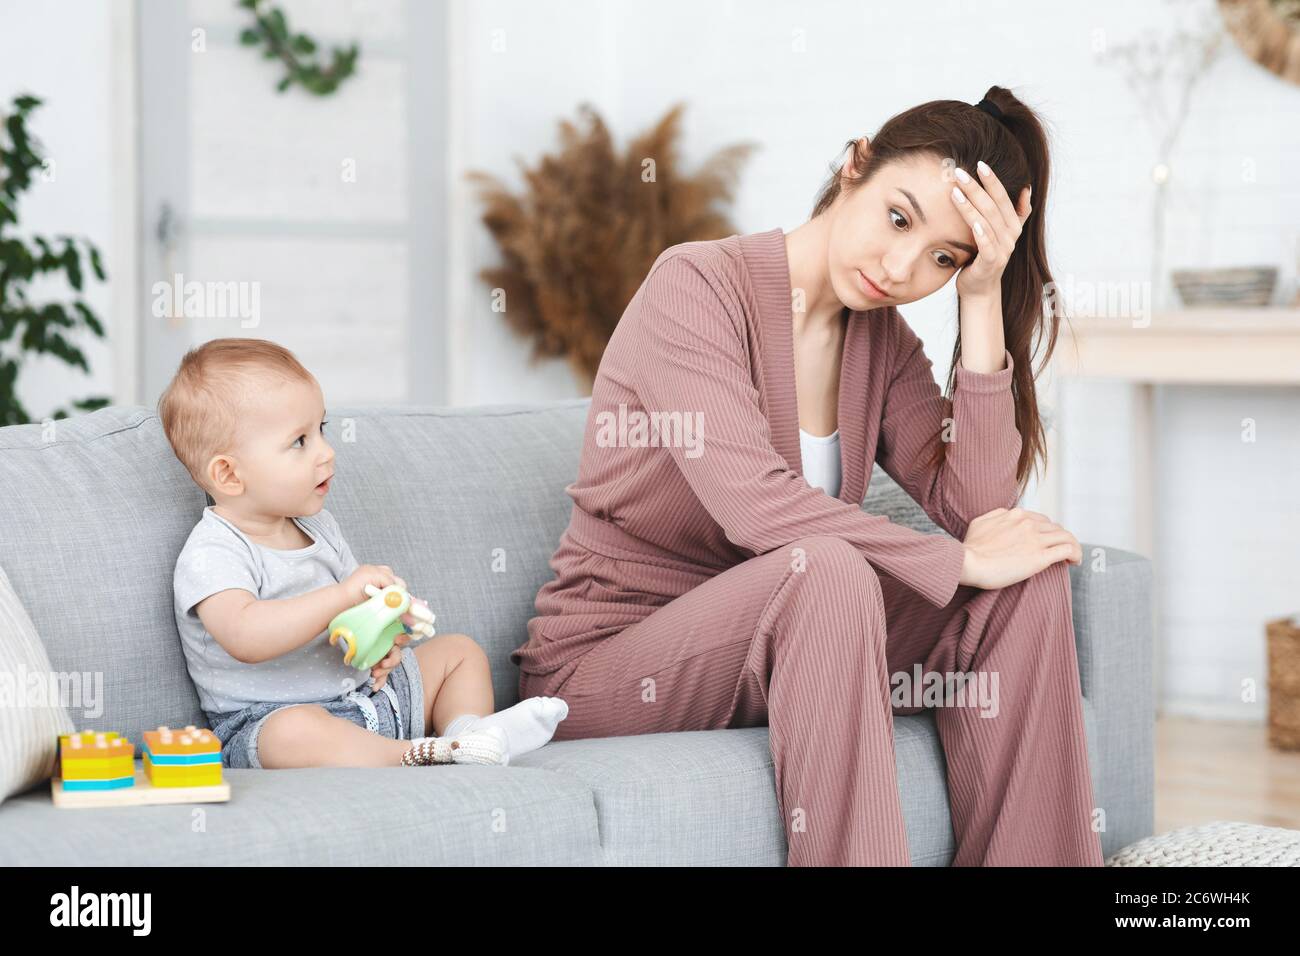 Frustration Of Motherhood. Depressed Young Woman Sitting Next To Her Toddler Baby Stock Photo